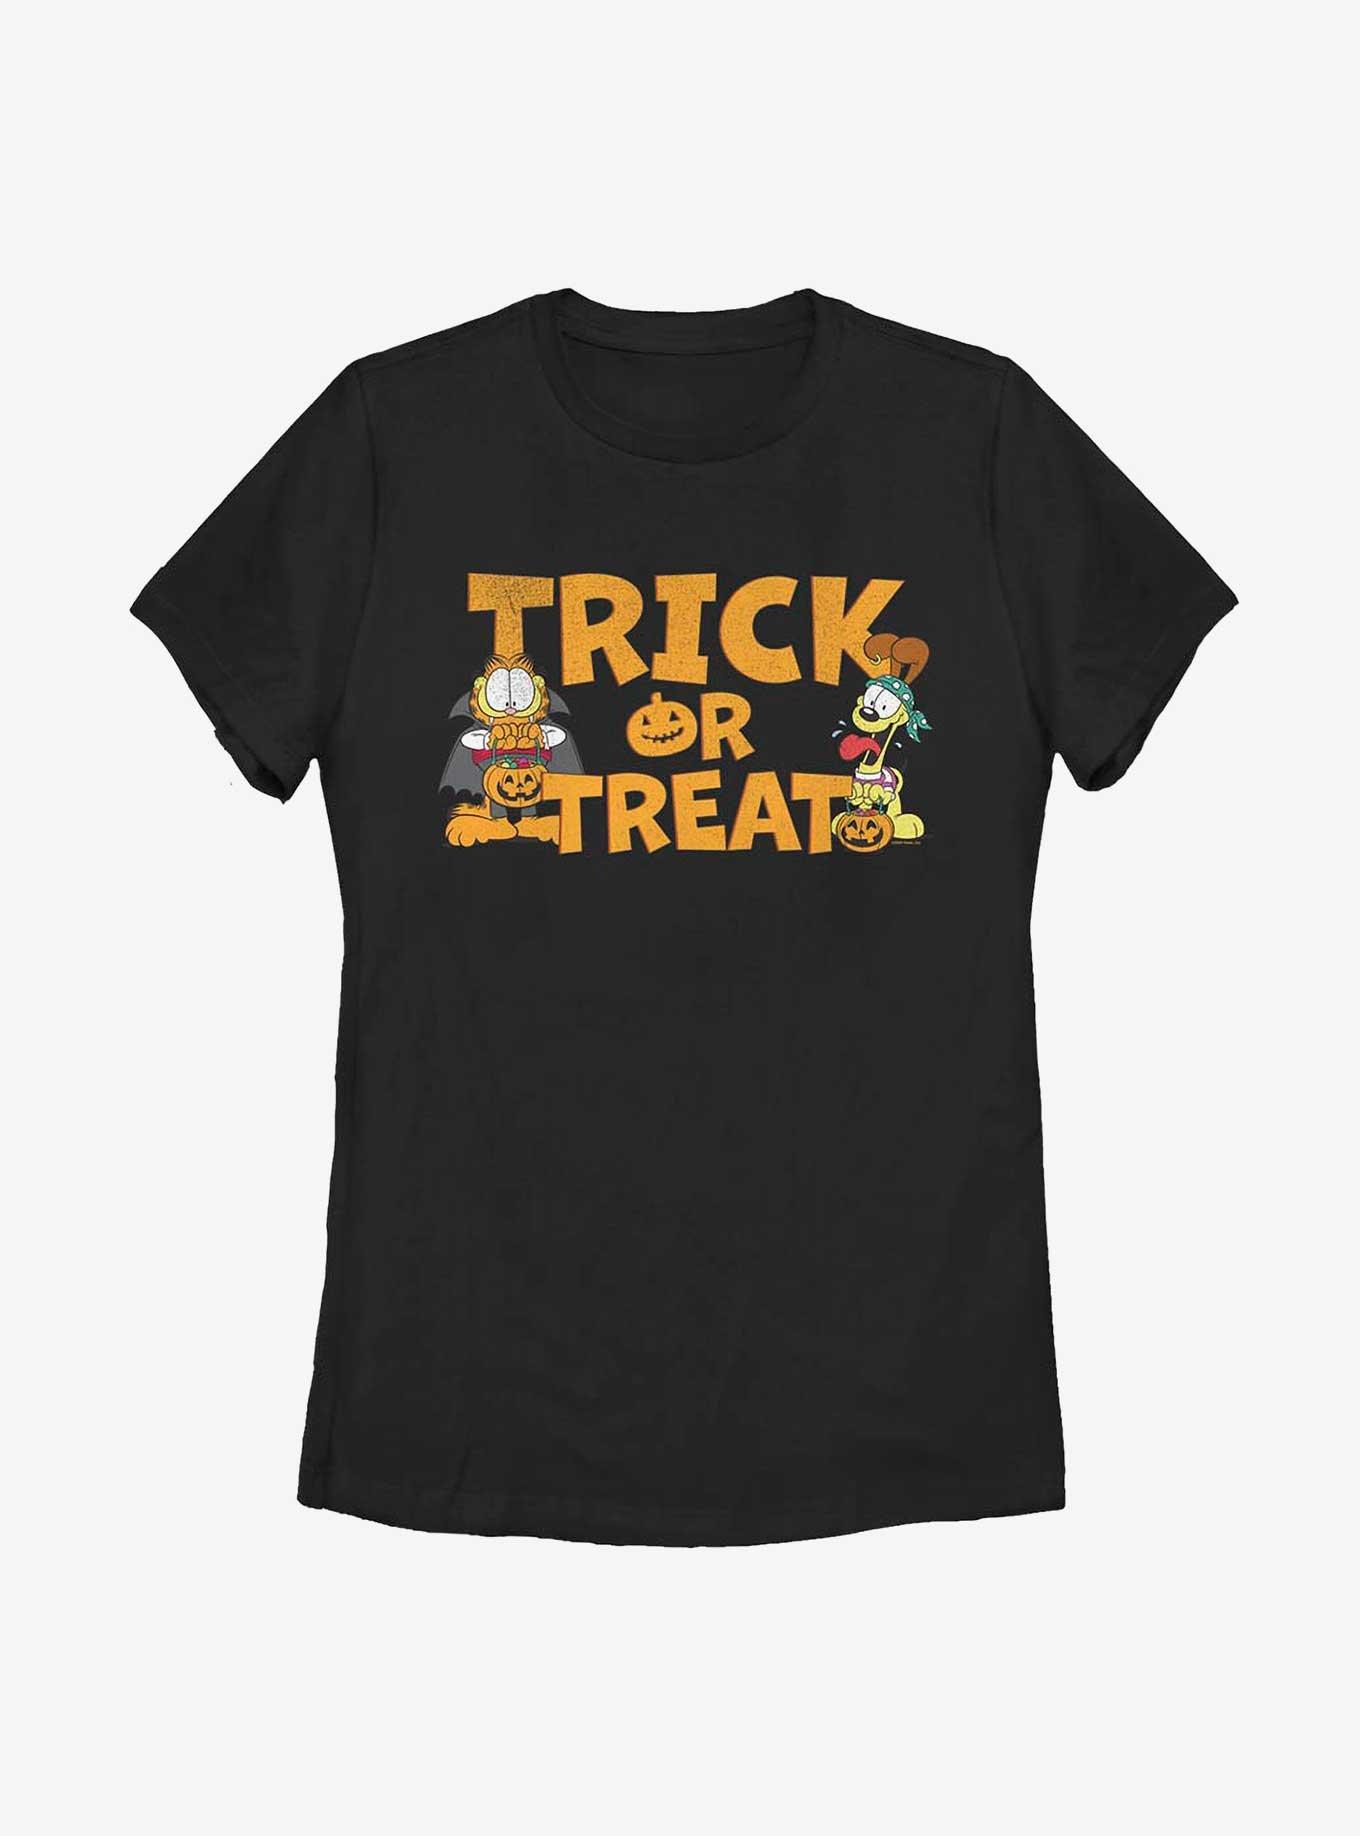 Garfield and Odie Halloween Trick or Treat Women's T-Shirt, BLACK, hi-res